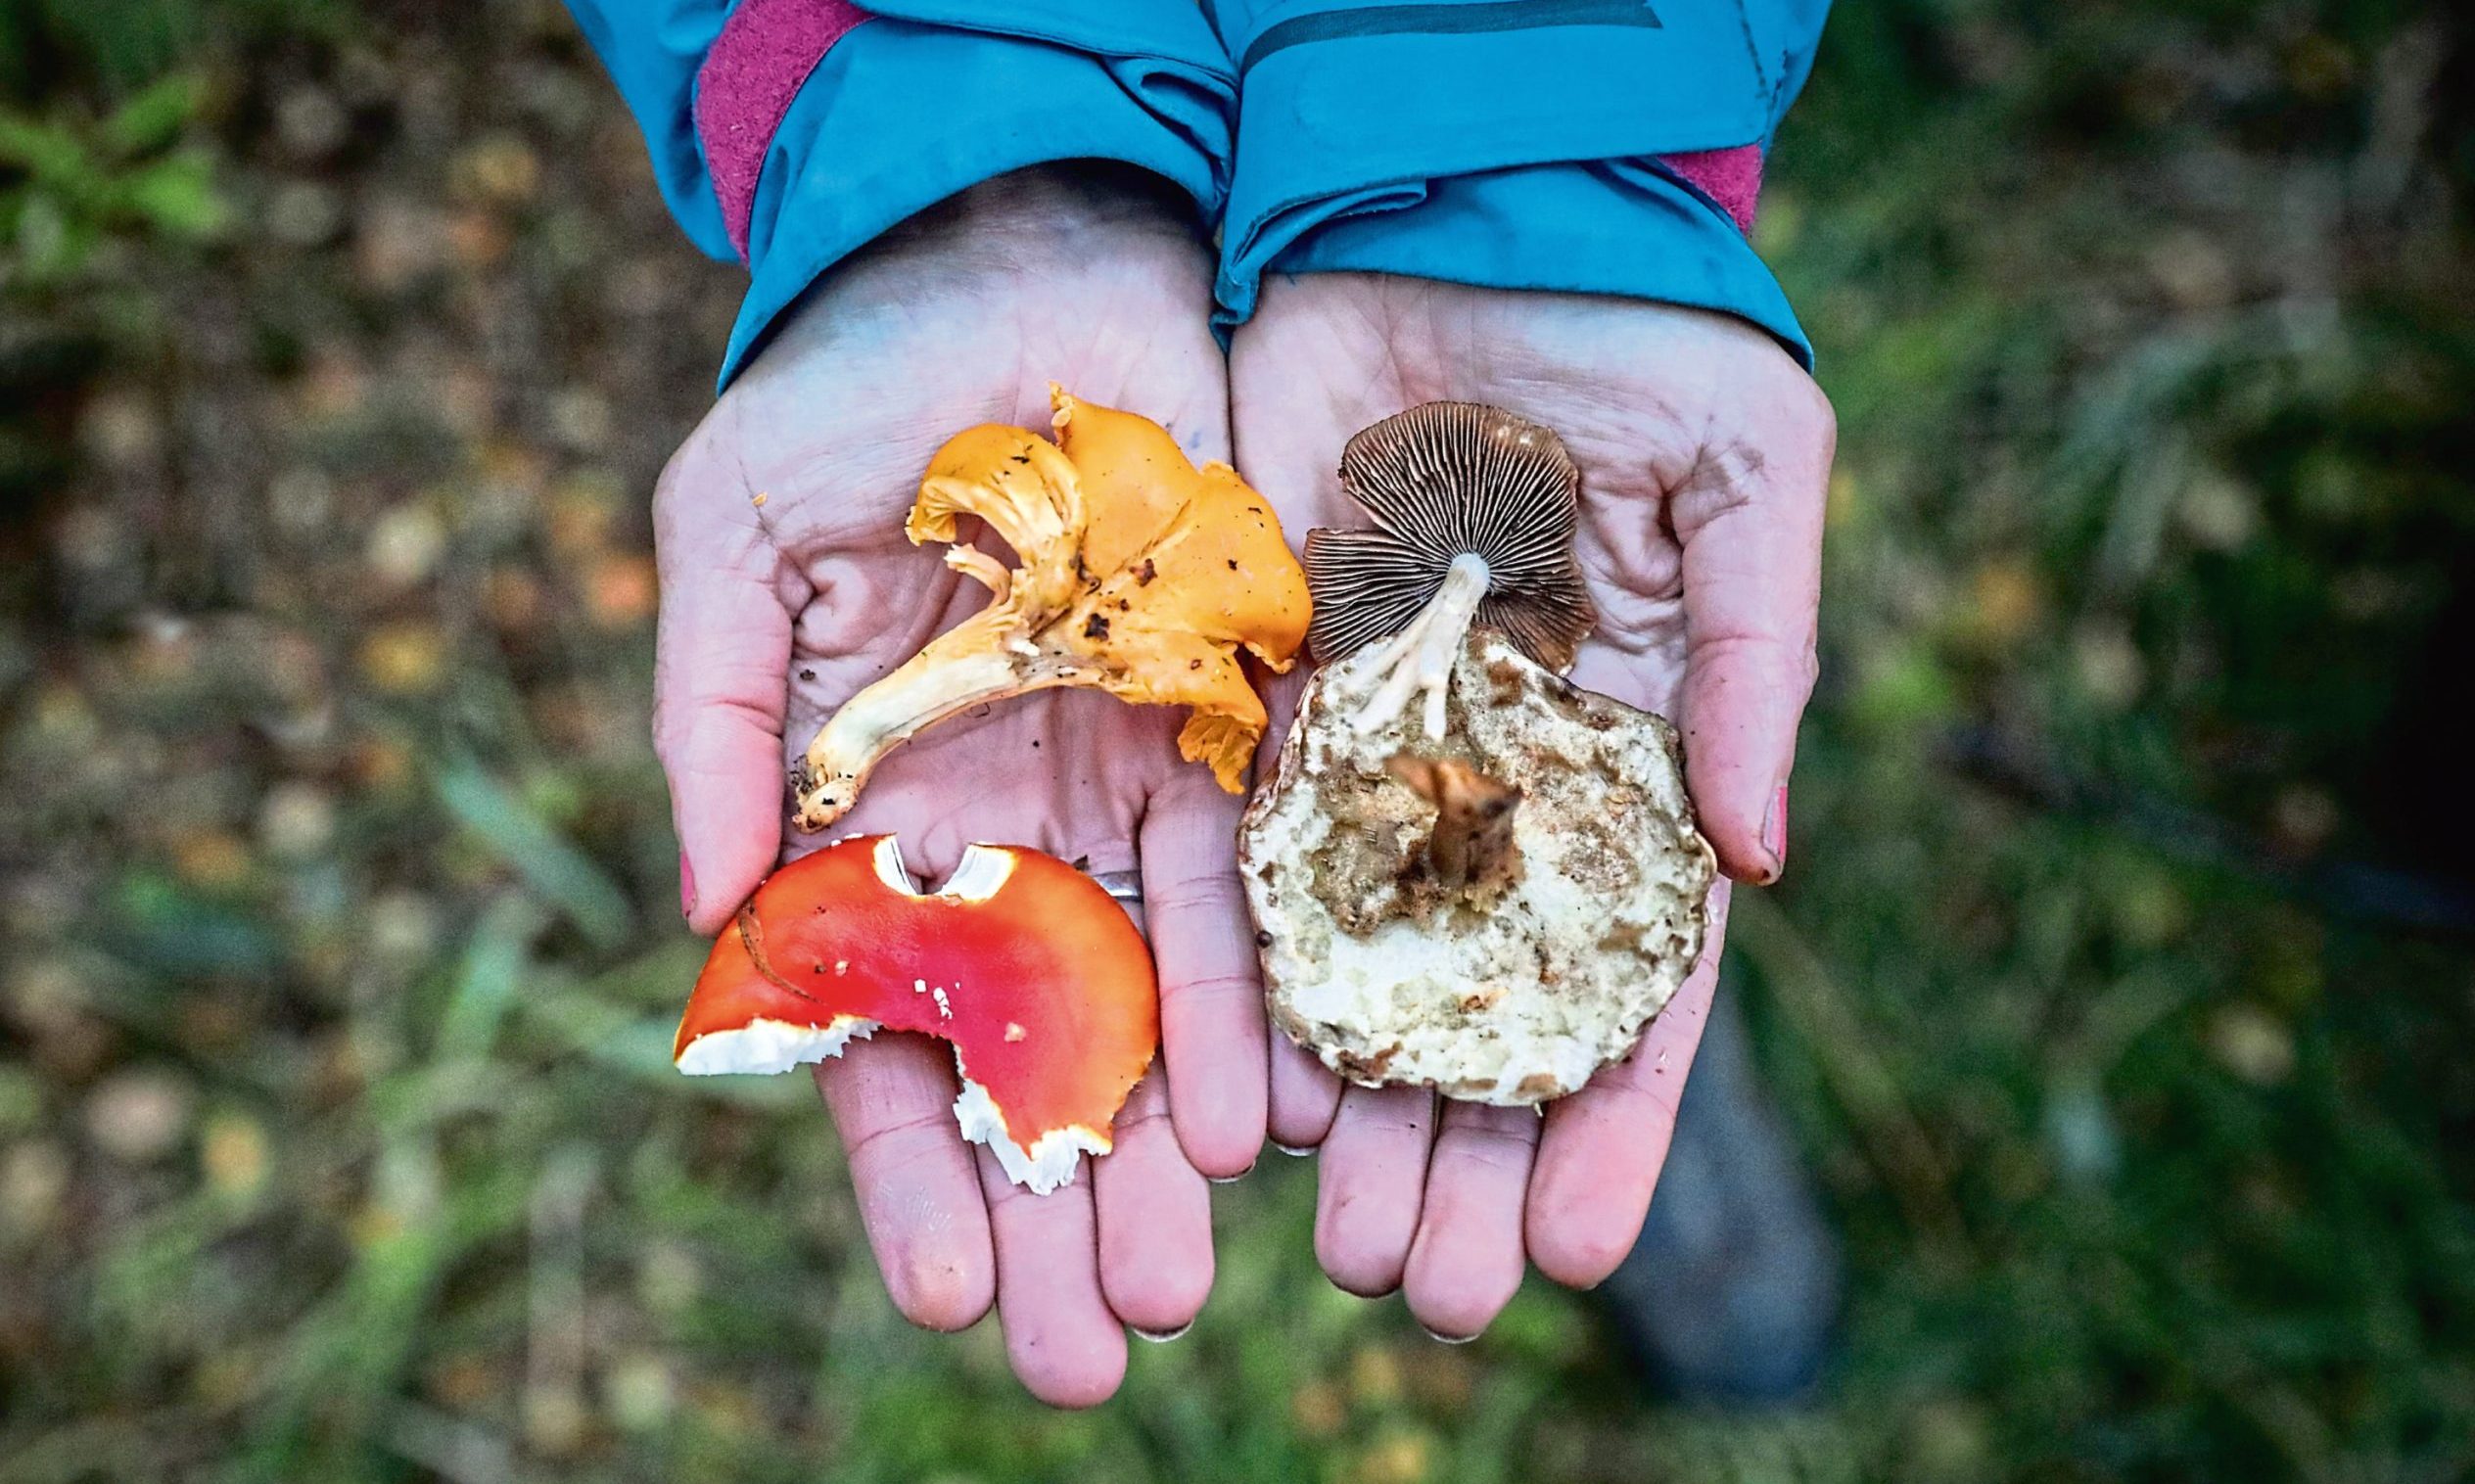 Writer Gayle Ritchie holds out some of the fungi found during a foraging walk in Bishop's Woods in Fife. Image: Mhairi Edwards.